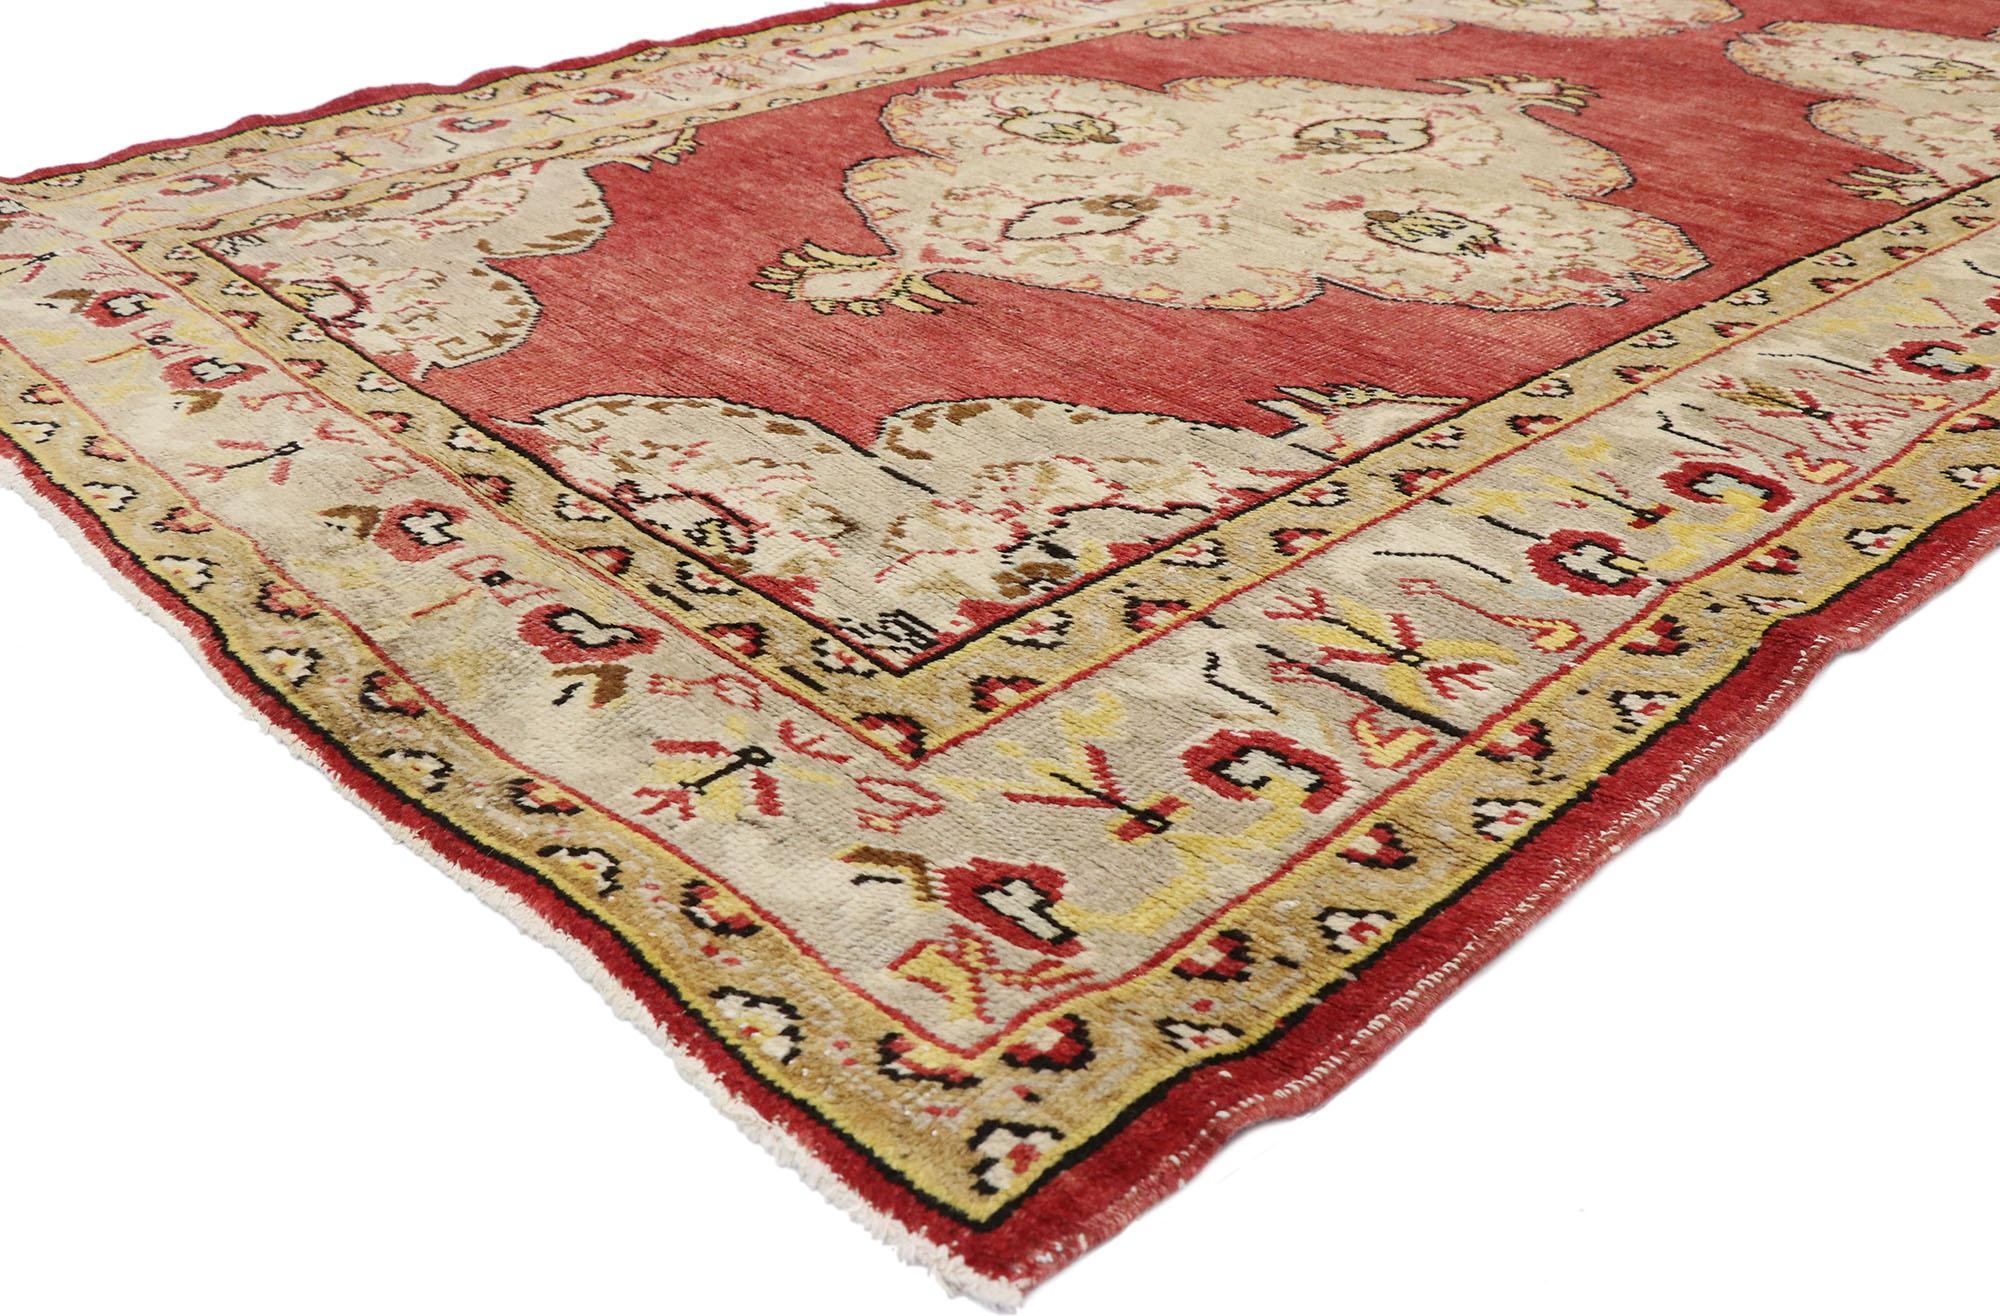 73752, vintage Turkish Oushak carpet runner with Jacobean Tudor style. With an elegant Turkish design and refined modest color palette, this vintage Turkish Oushak carpet runner keeps the eyes entertained, but it is still traditional and